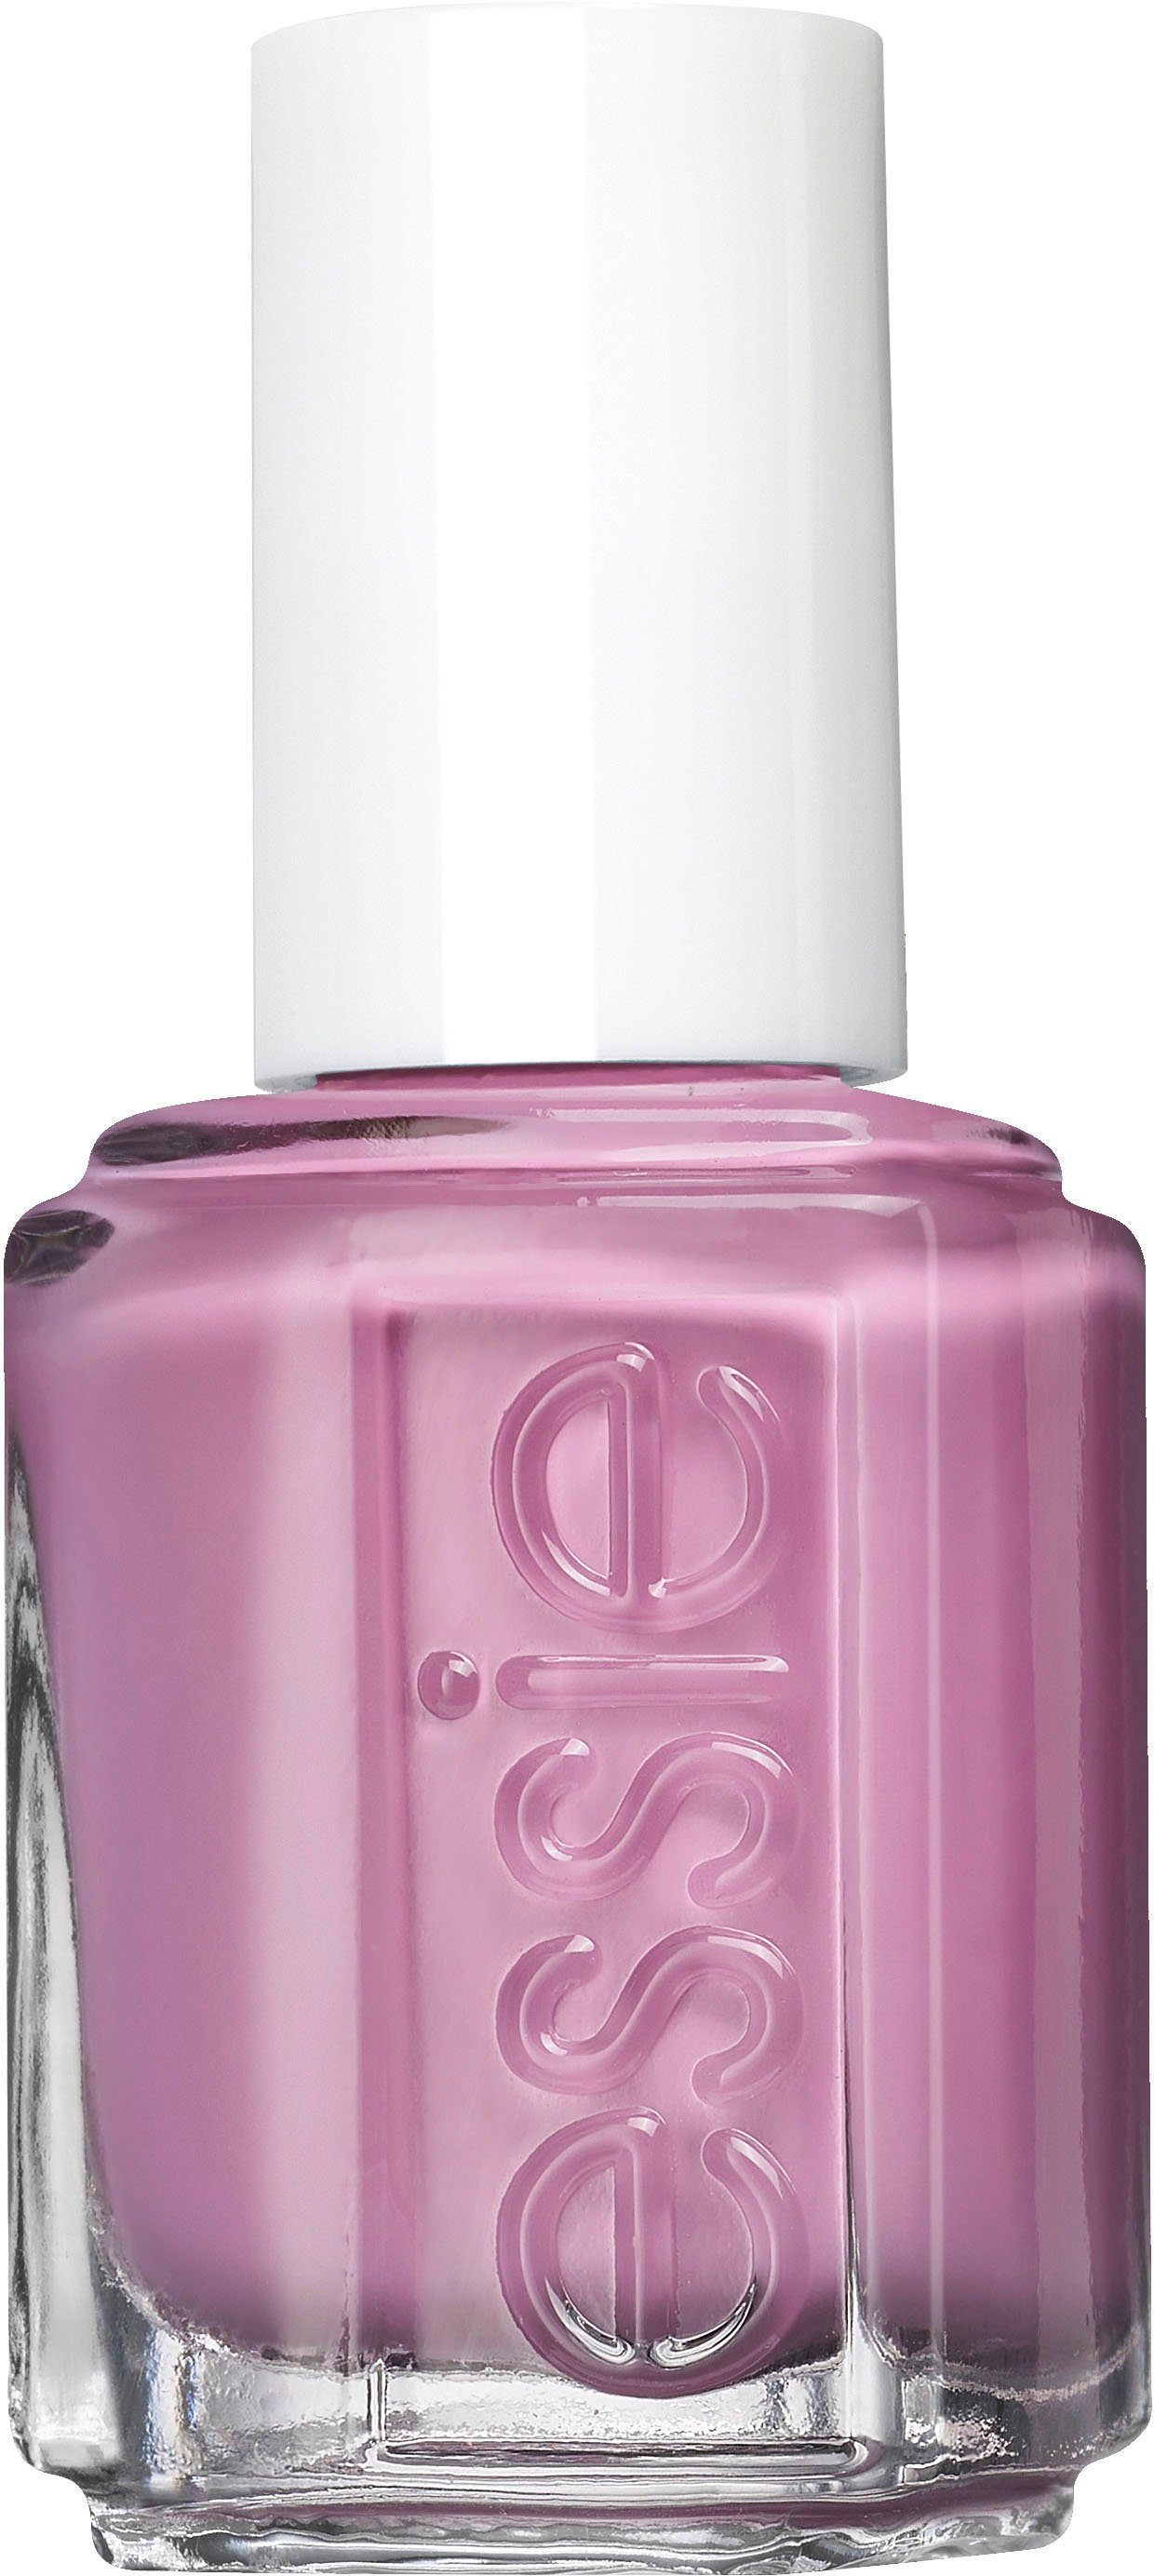 essie Nagellack Lilatöne 718 you Nr. suits swell